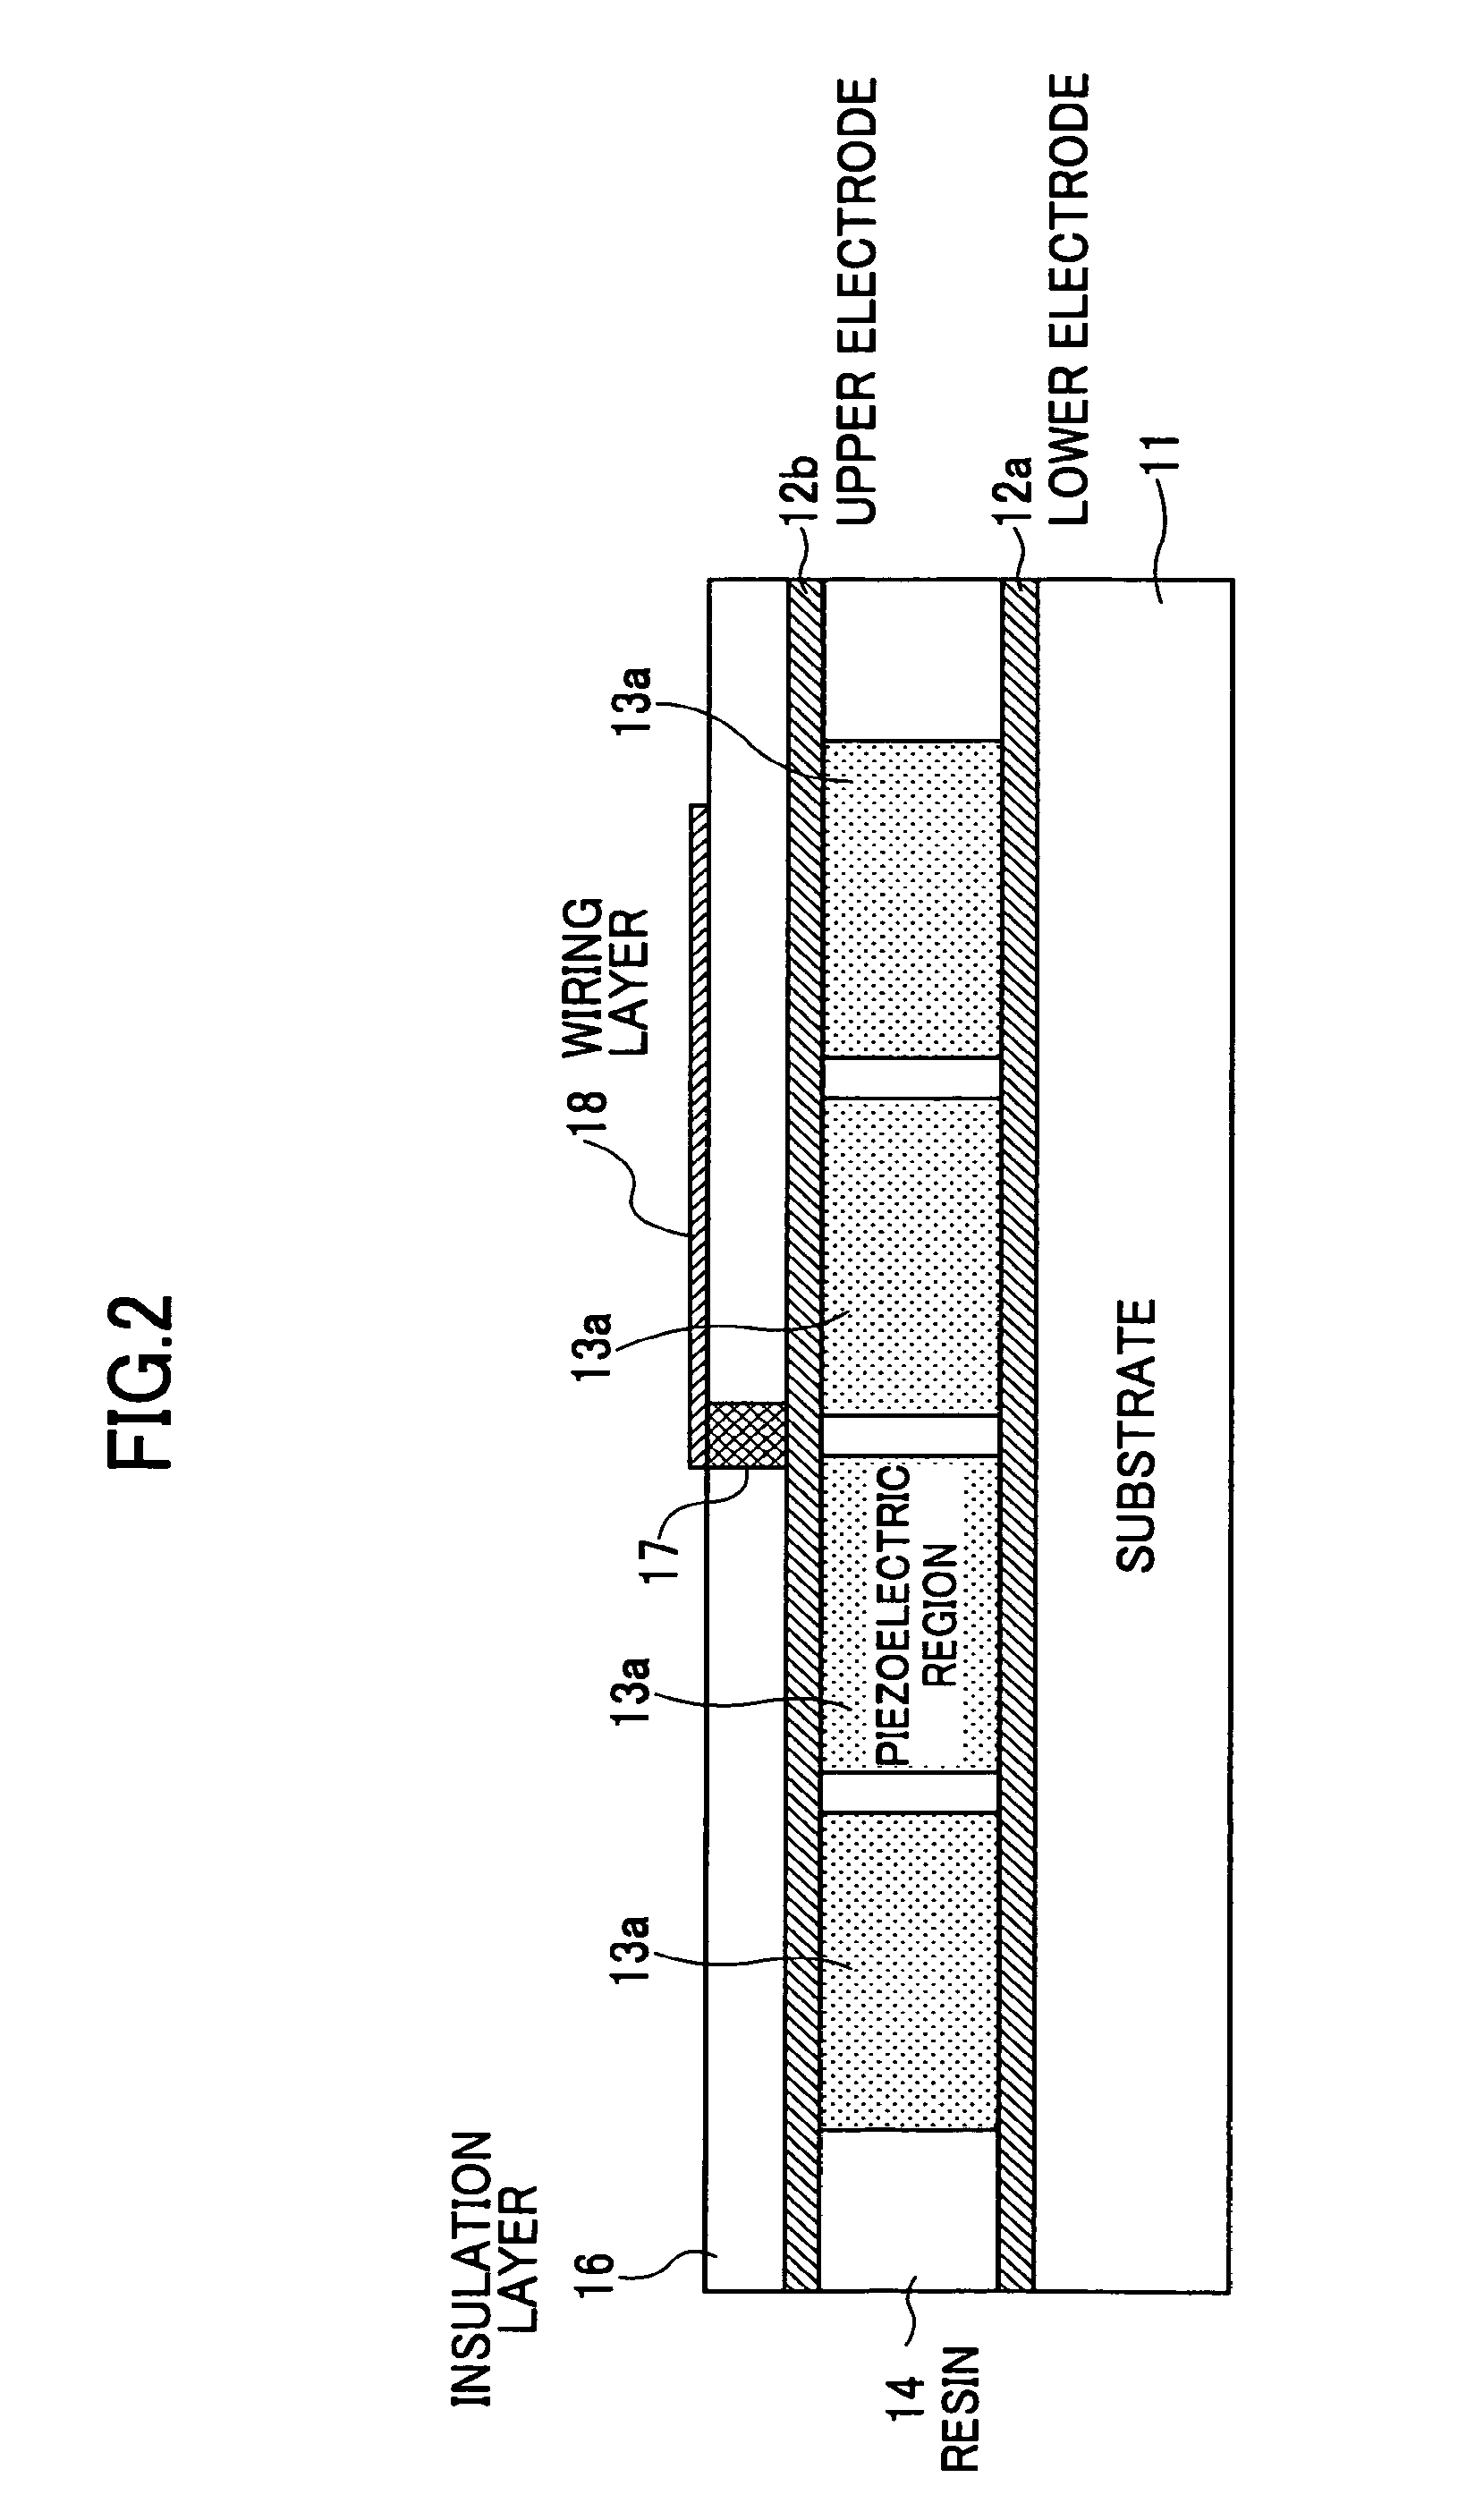 Thin-film piezoelectric device and method of manufacturing the same